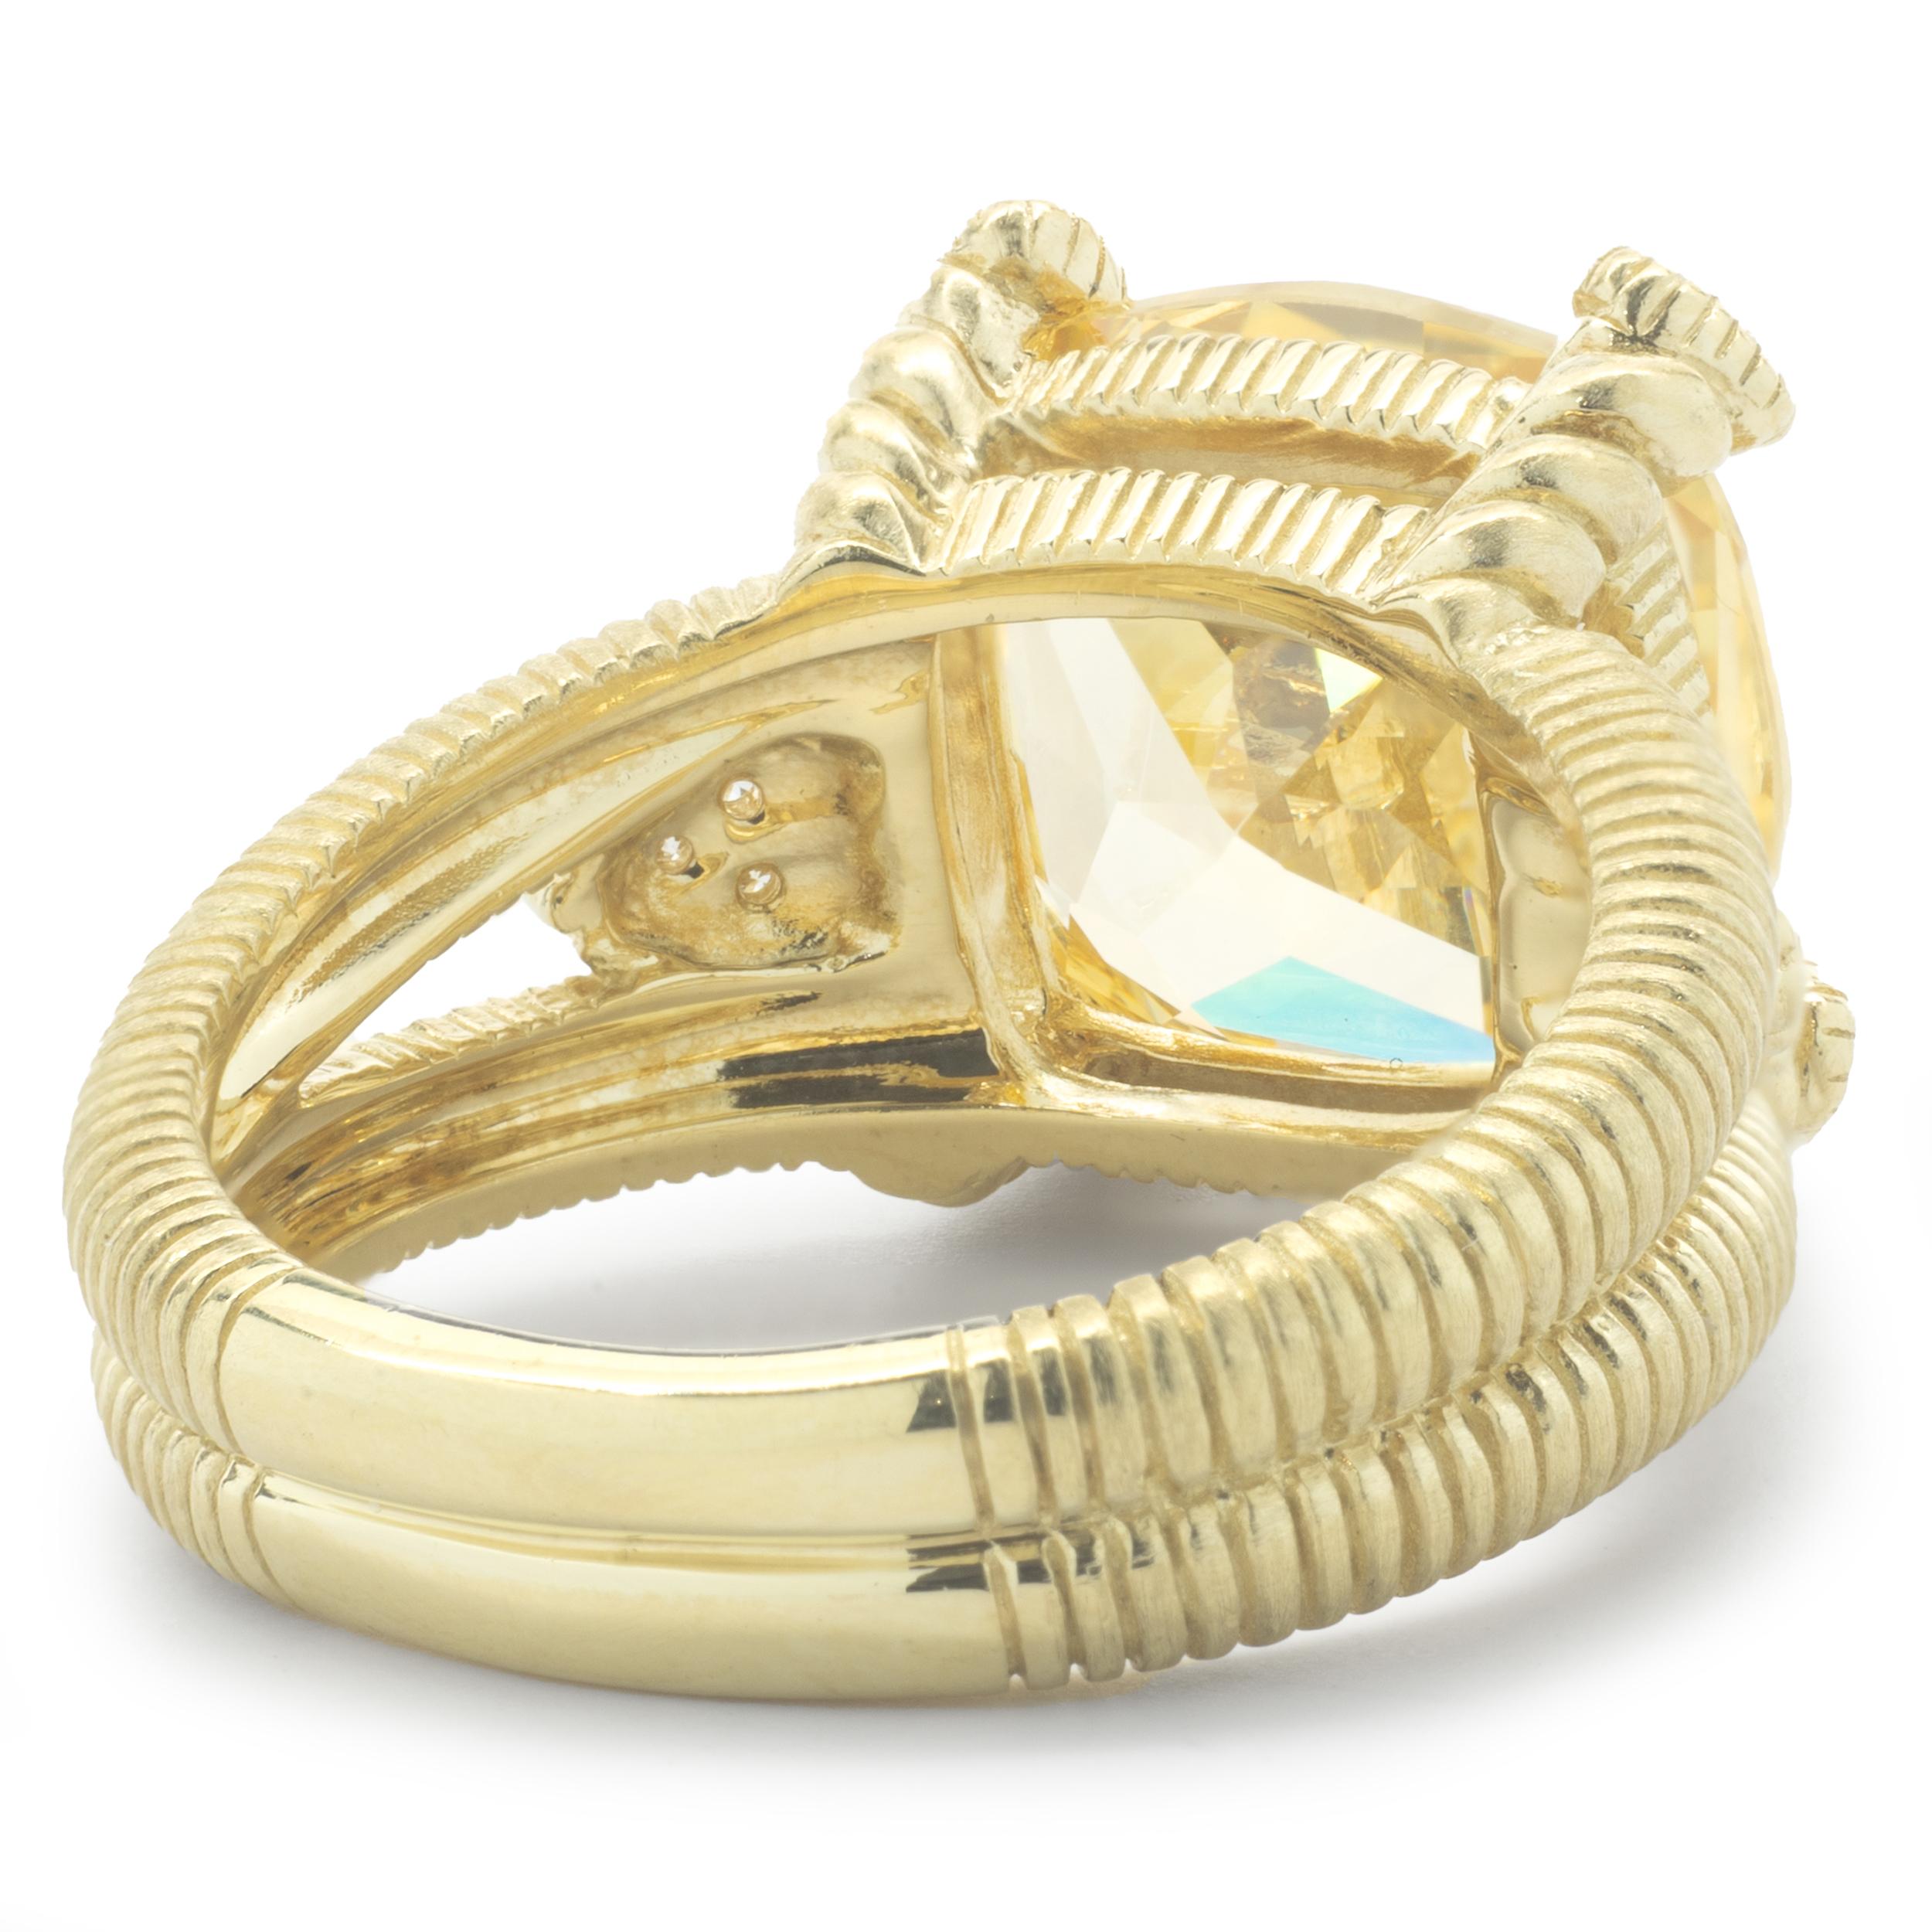 Designer: Judith Ripka
Material: 18K yellow gold
Diamond: 6 round brilliant cut = .06cttw
Color: G
Clarity: VS1
Dimensions: ring top measures 13.8mm wide
Weight: 12.20 grams
